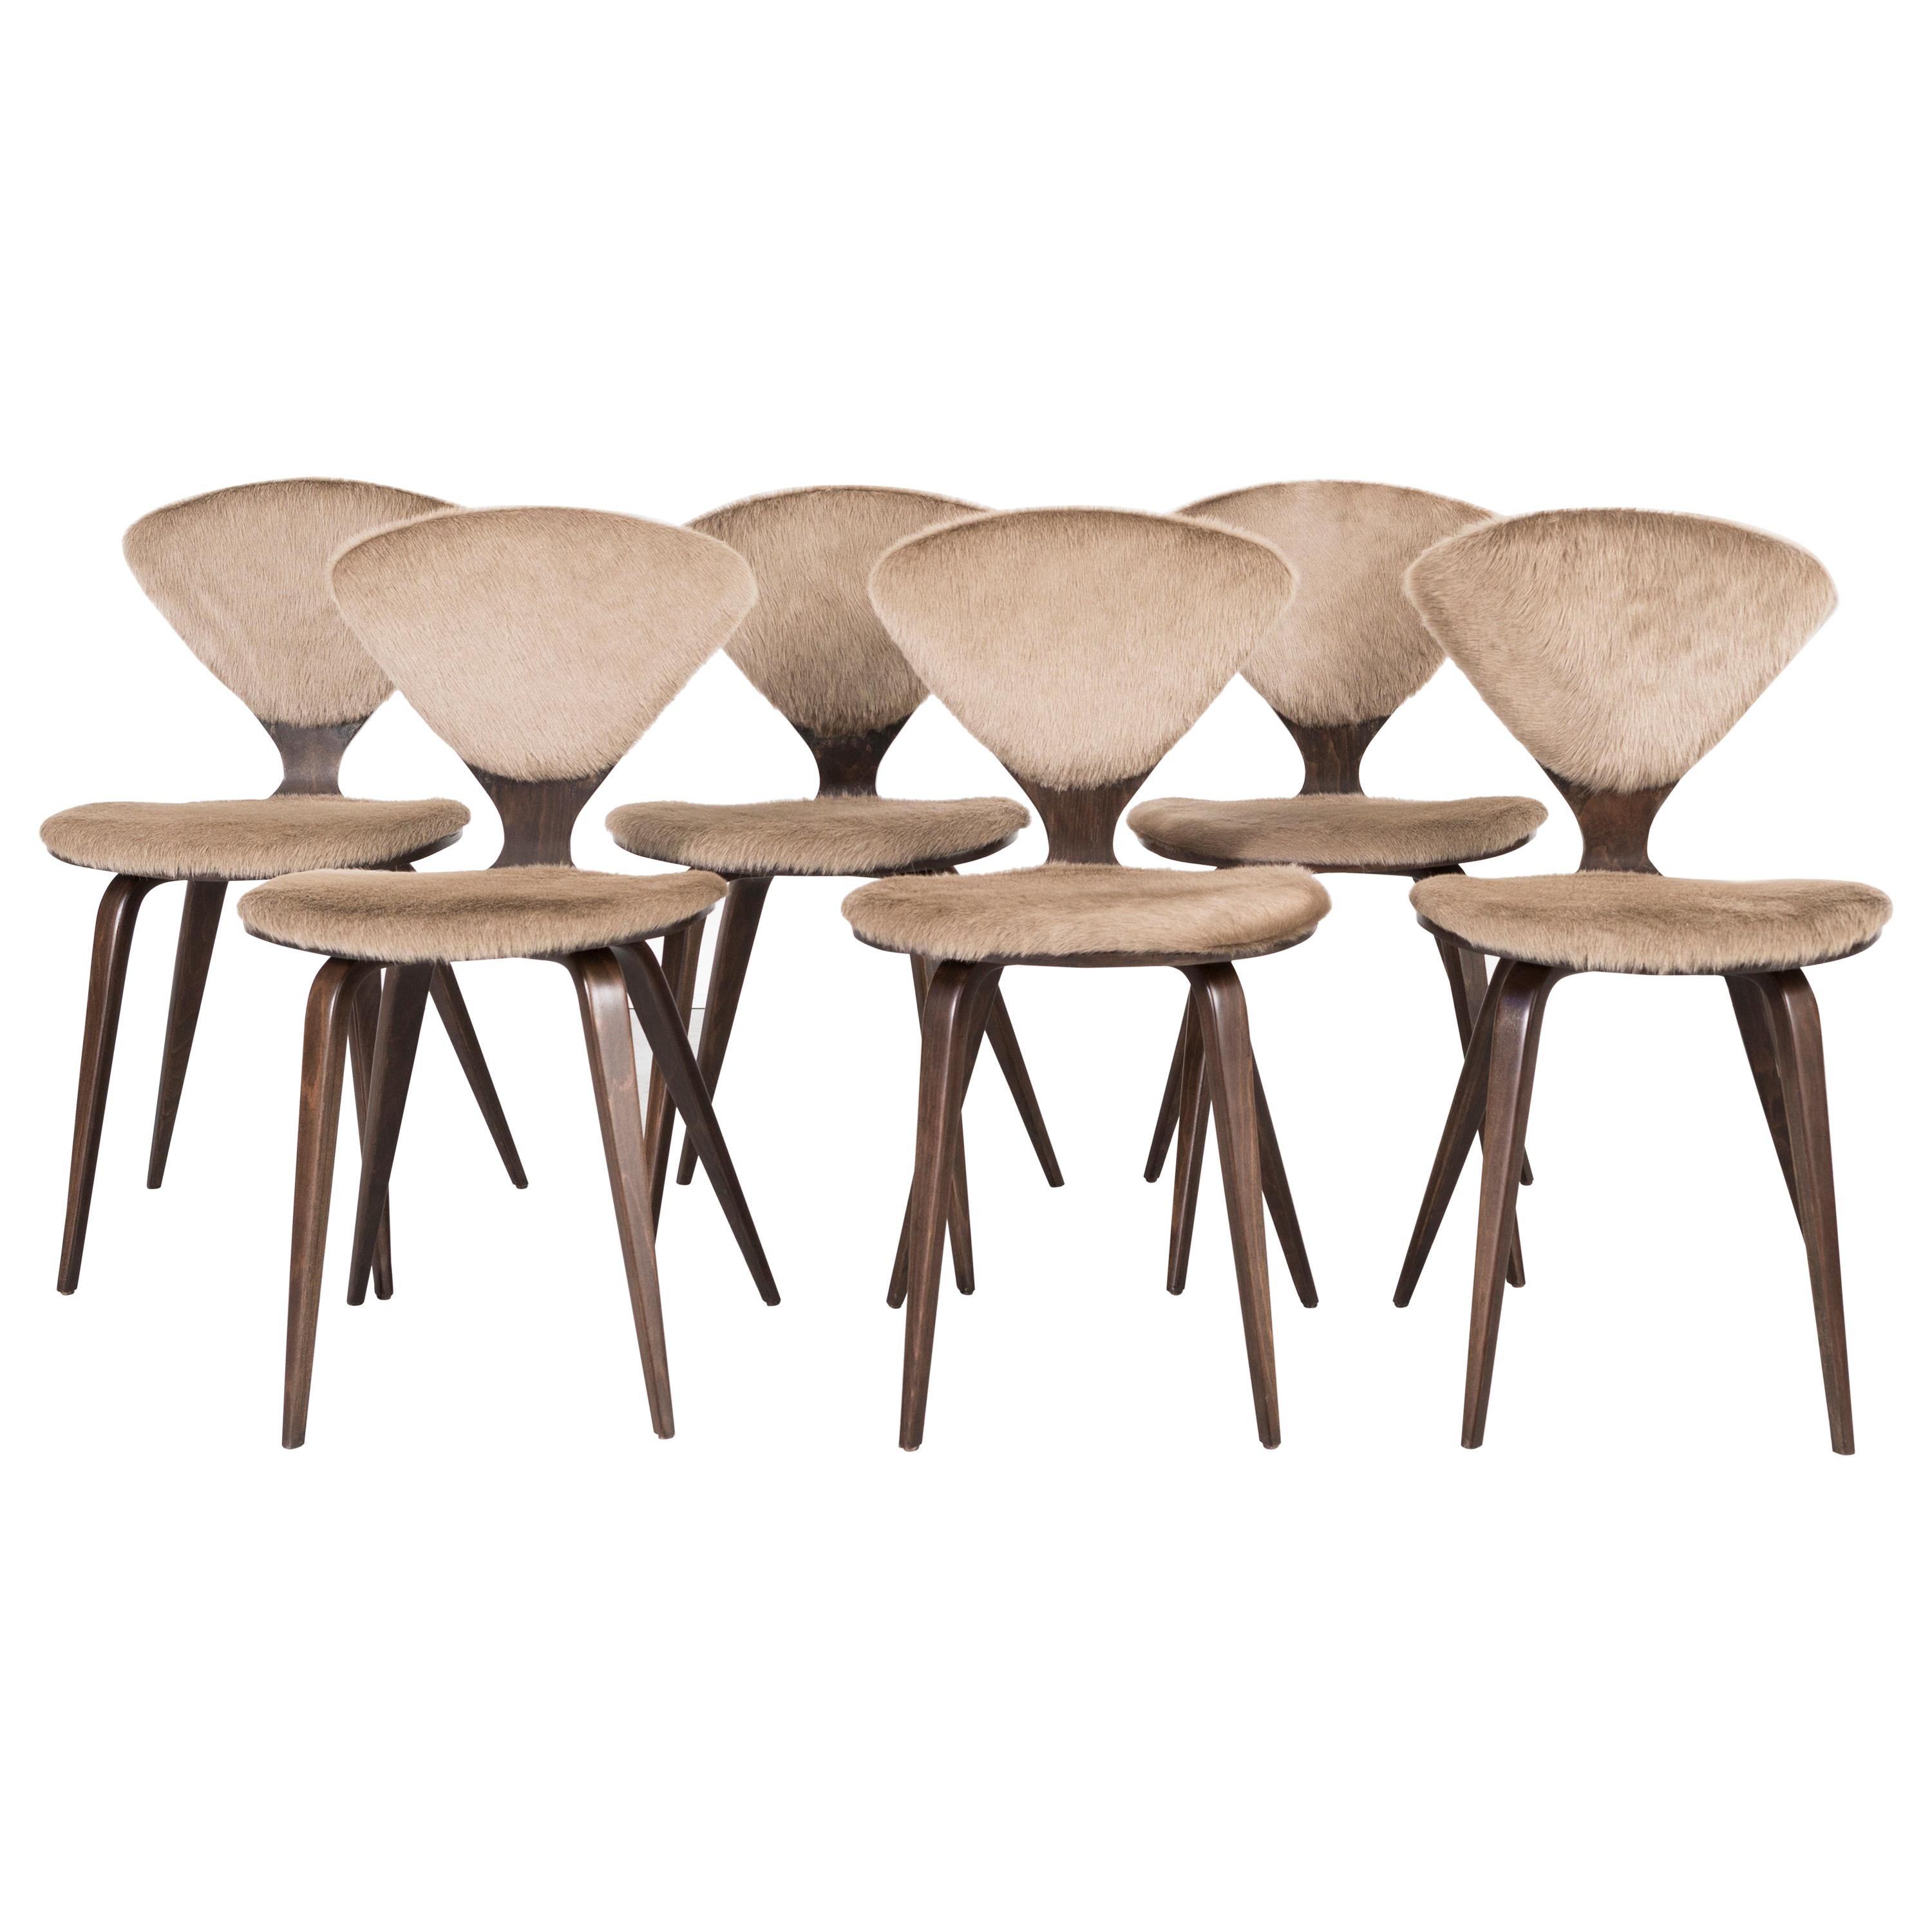 Set of Mid-Century Modern Norman Cherner for Plycraft Dining Chairs